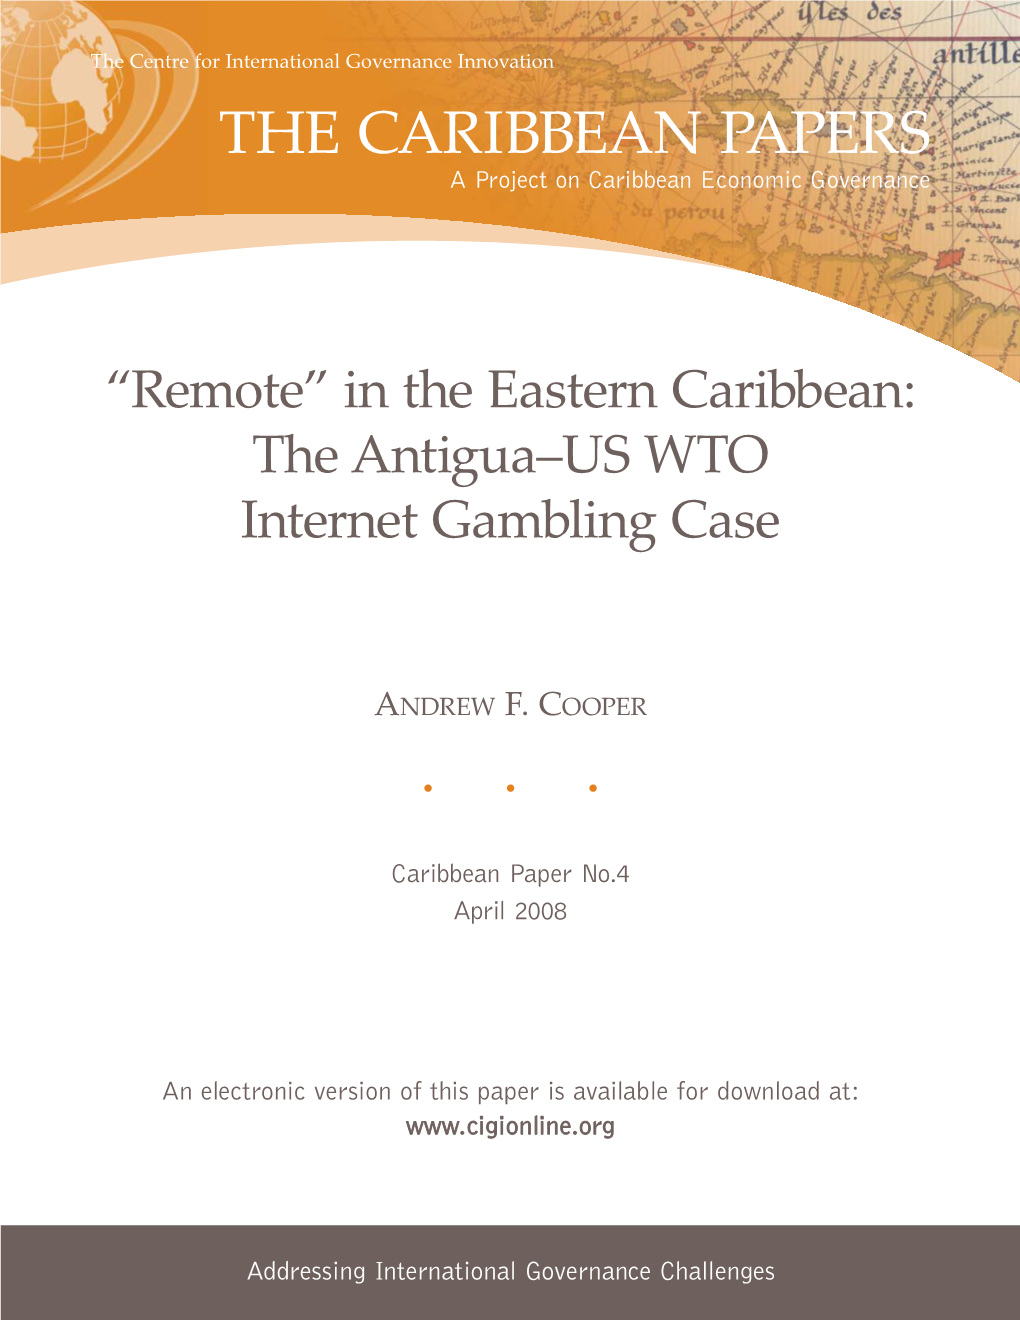 In the Eastern Caribbean: the Antigua–US WTO Internet Gambling Case